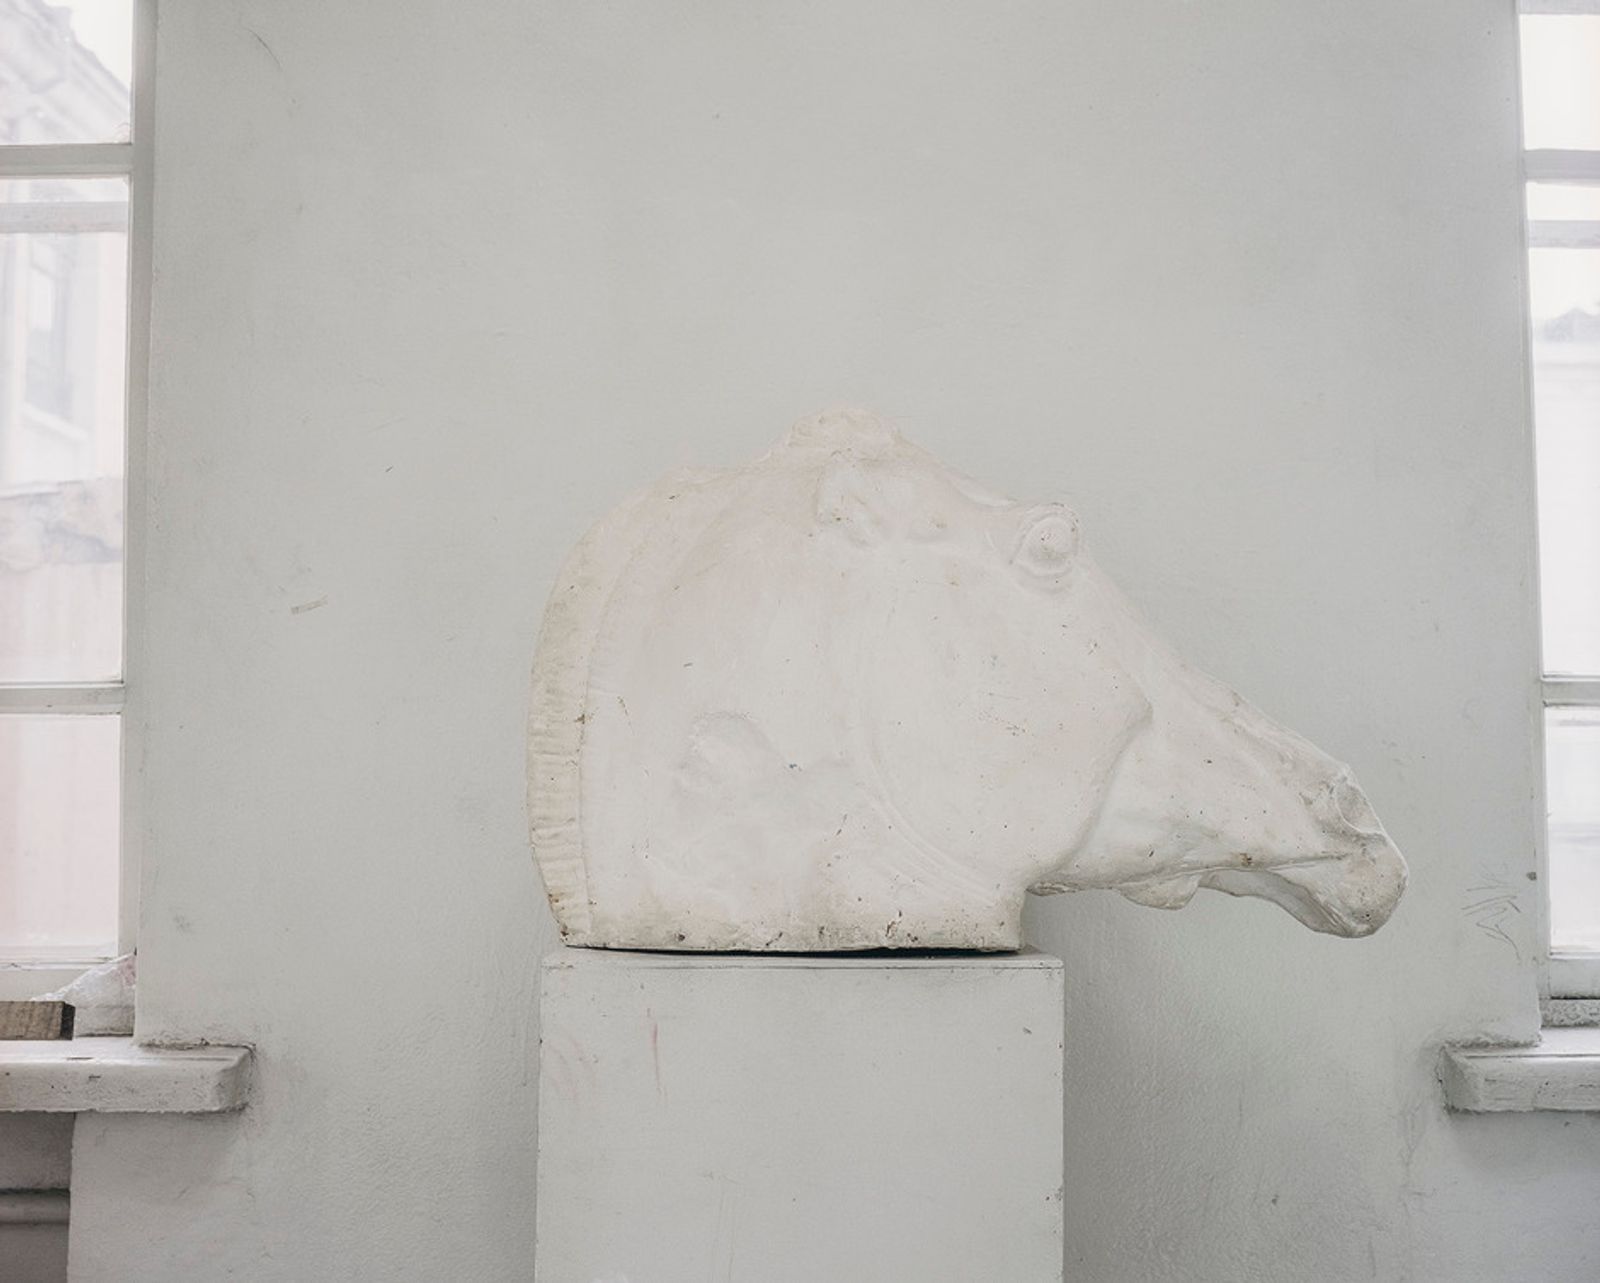 © Artur Alan Willmann - Image from the Landscape with a plastic horse photography project